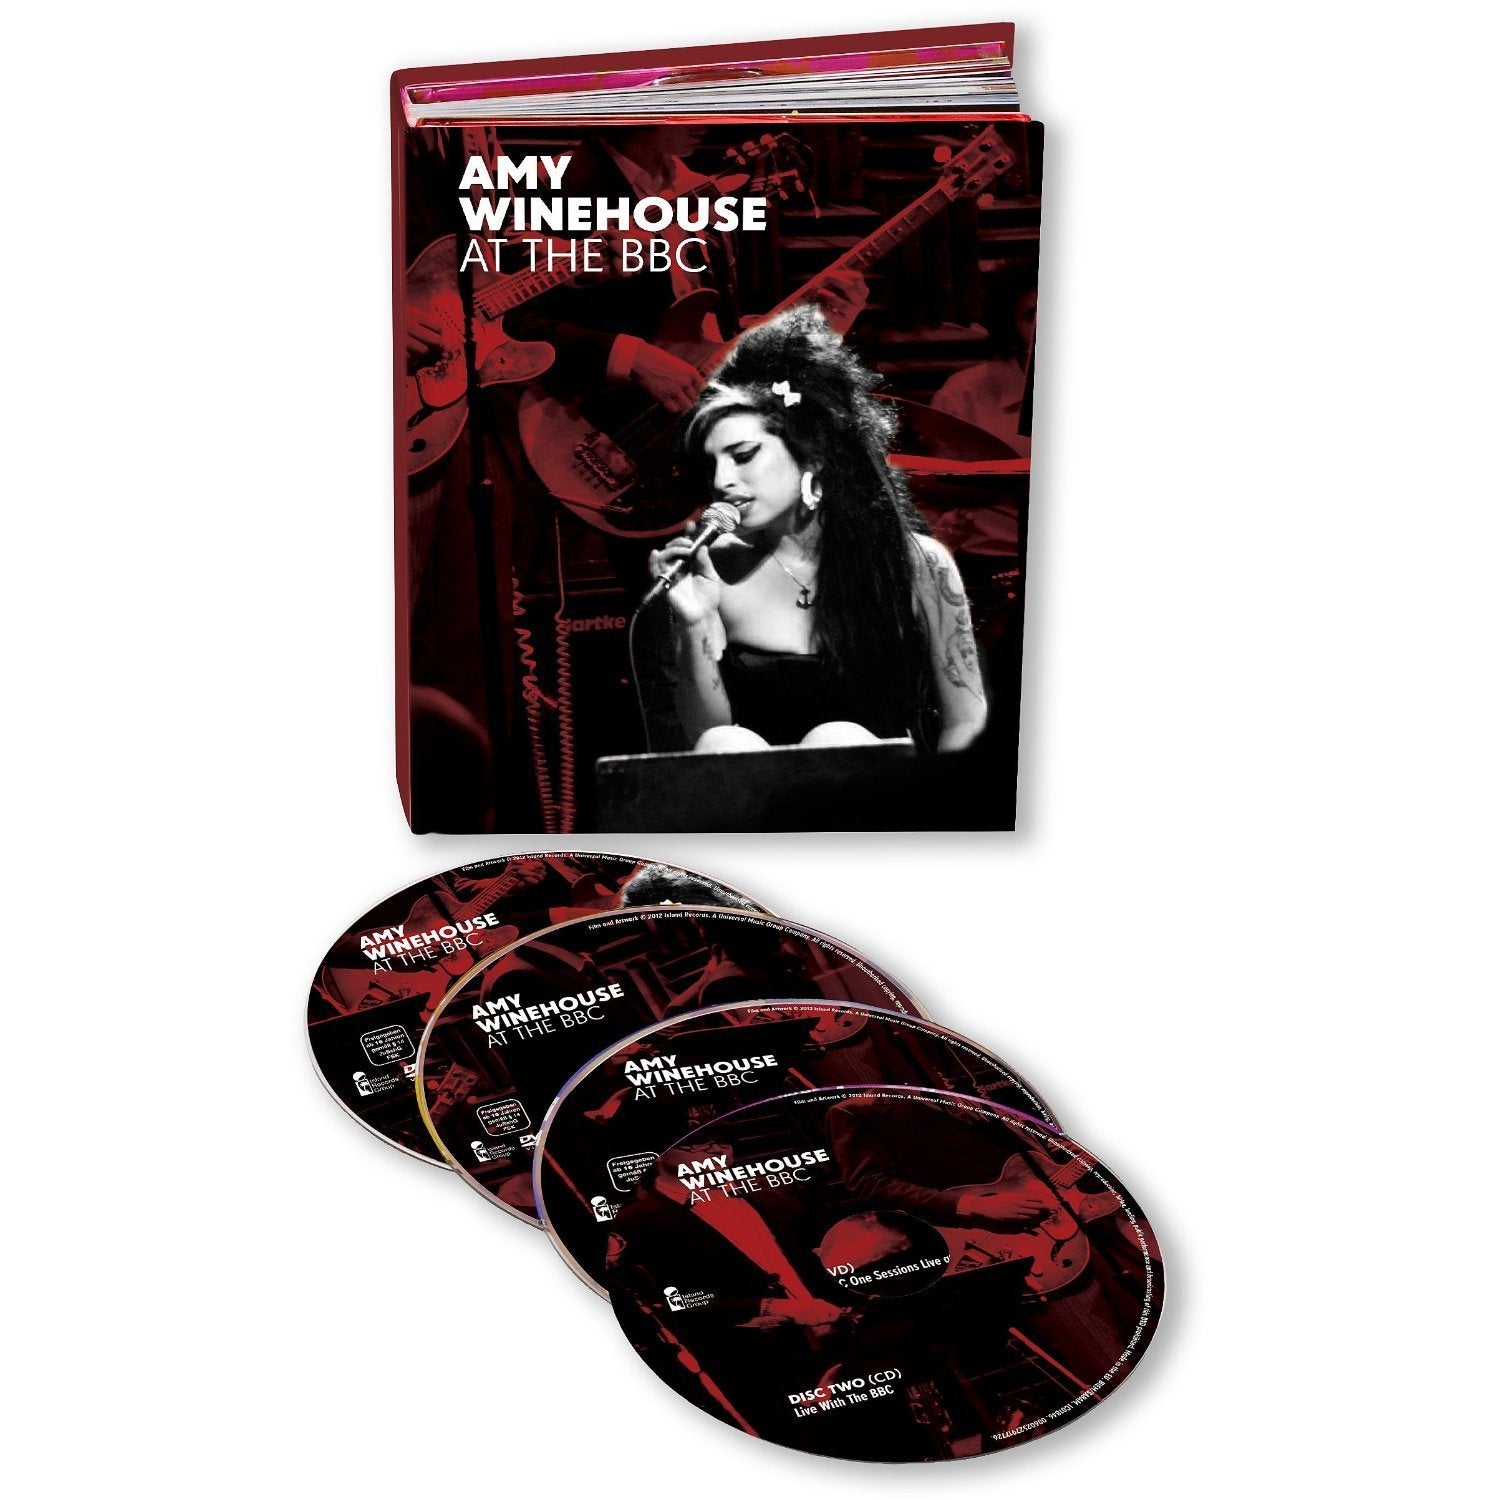 Amy Winehouse - Amy Winehouse At The BBC: Deluxe CD/DVD